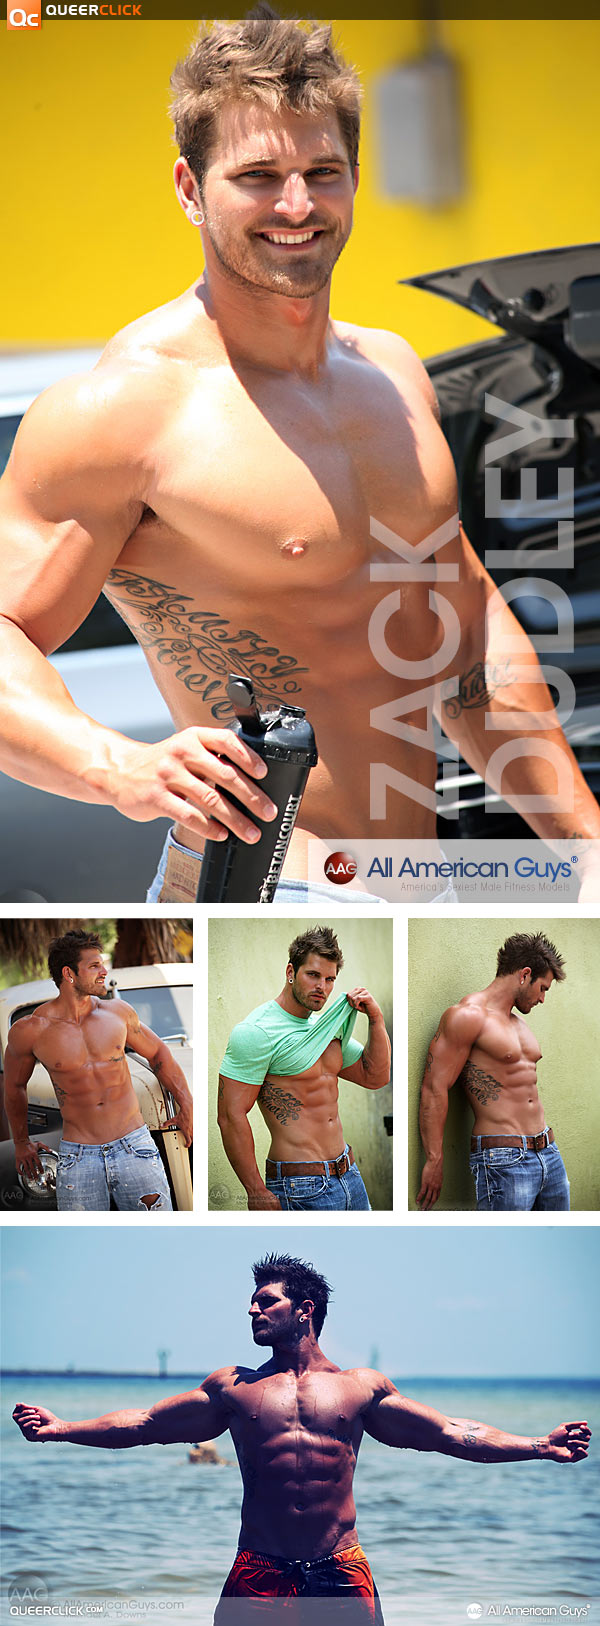 All American Guys: Zack Dudley